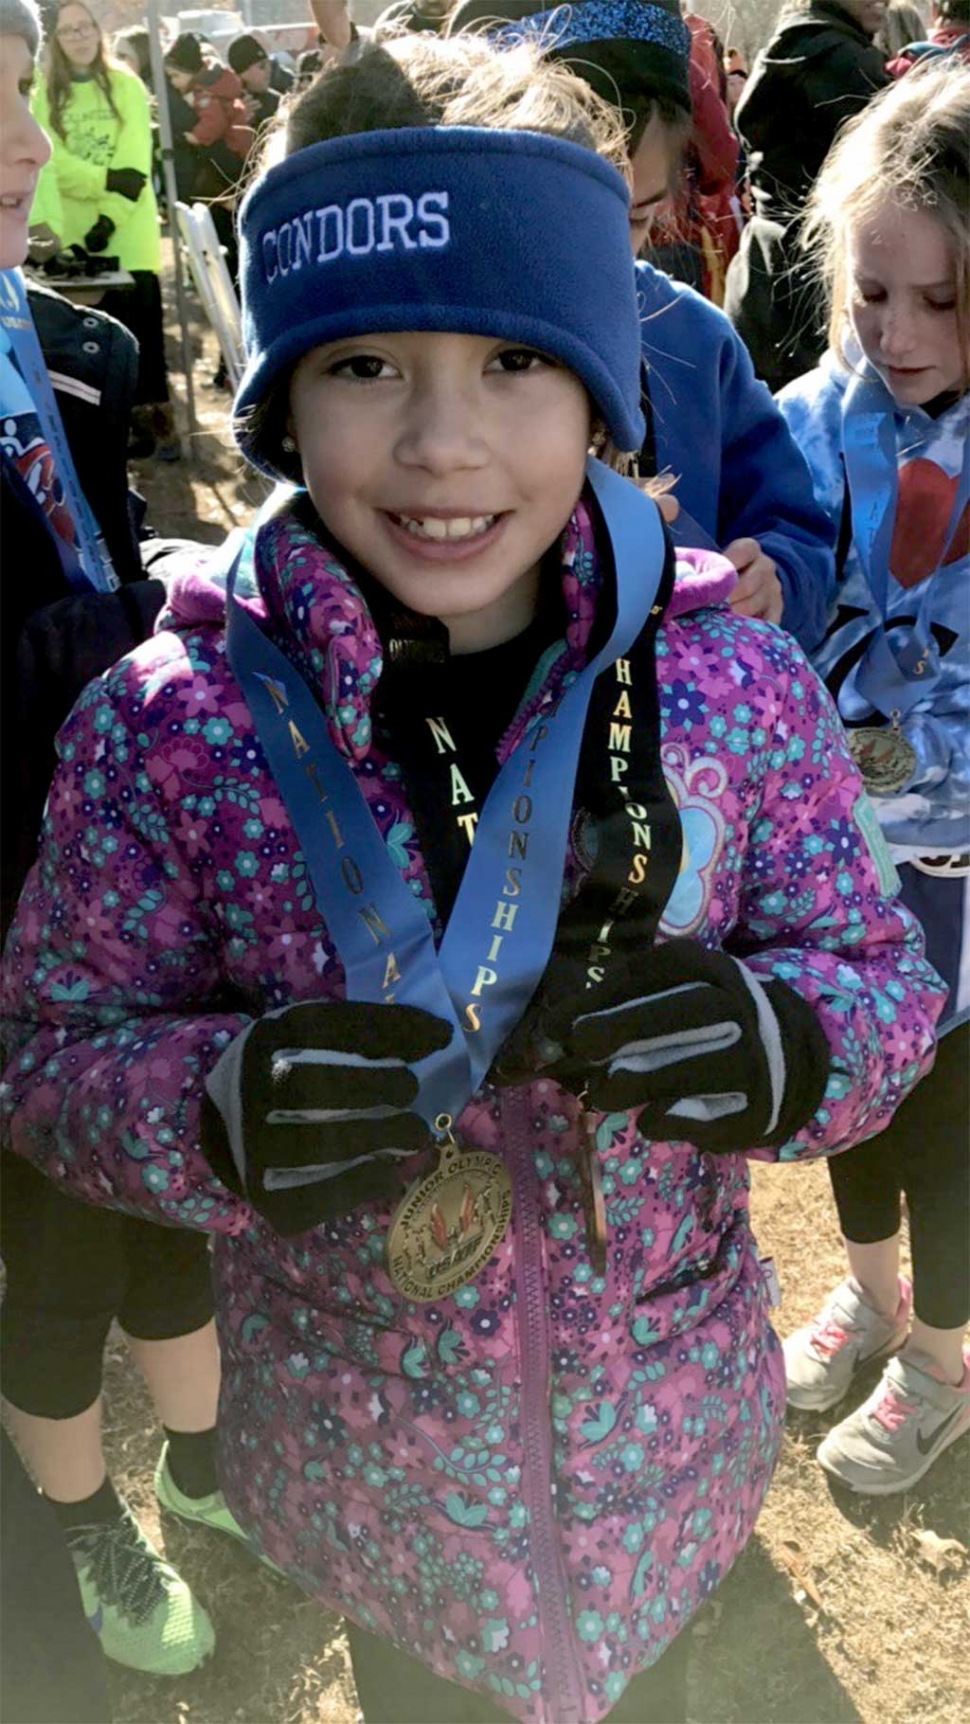 Seven year old Paola Estrada received medals for placing 9th out of 120 runners in the 8 & under division in Alabama.